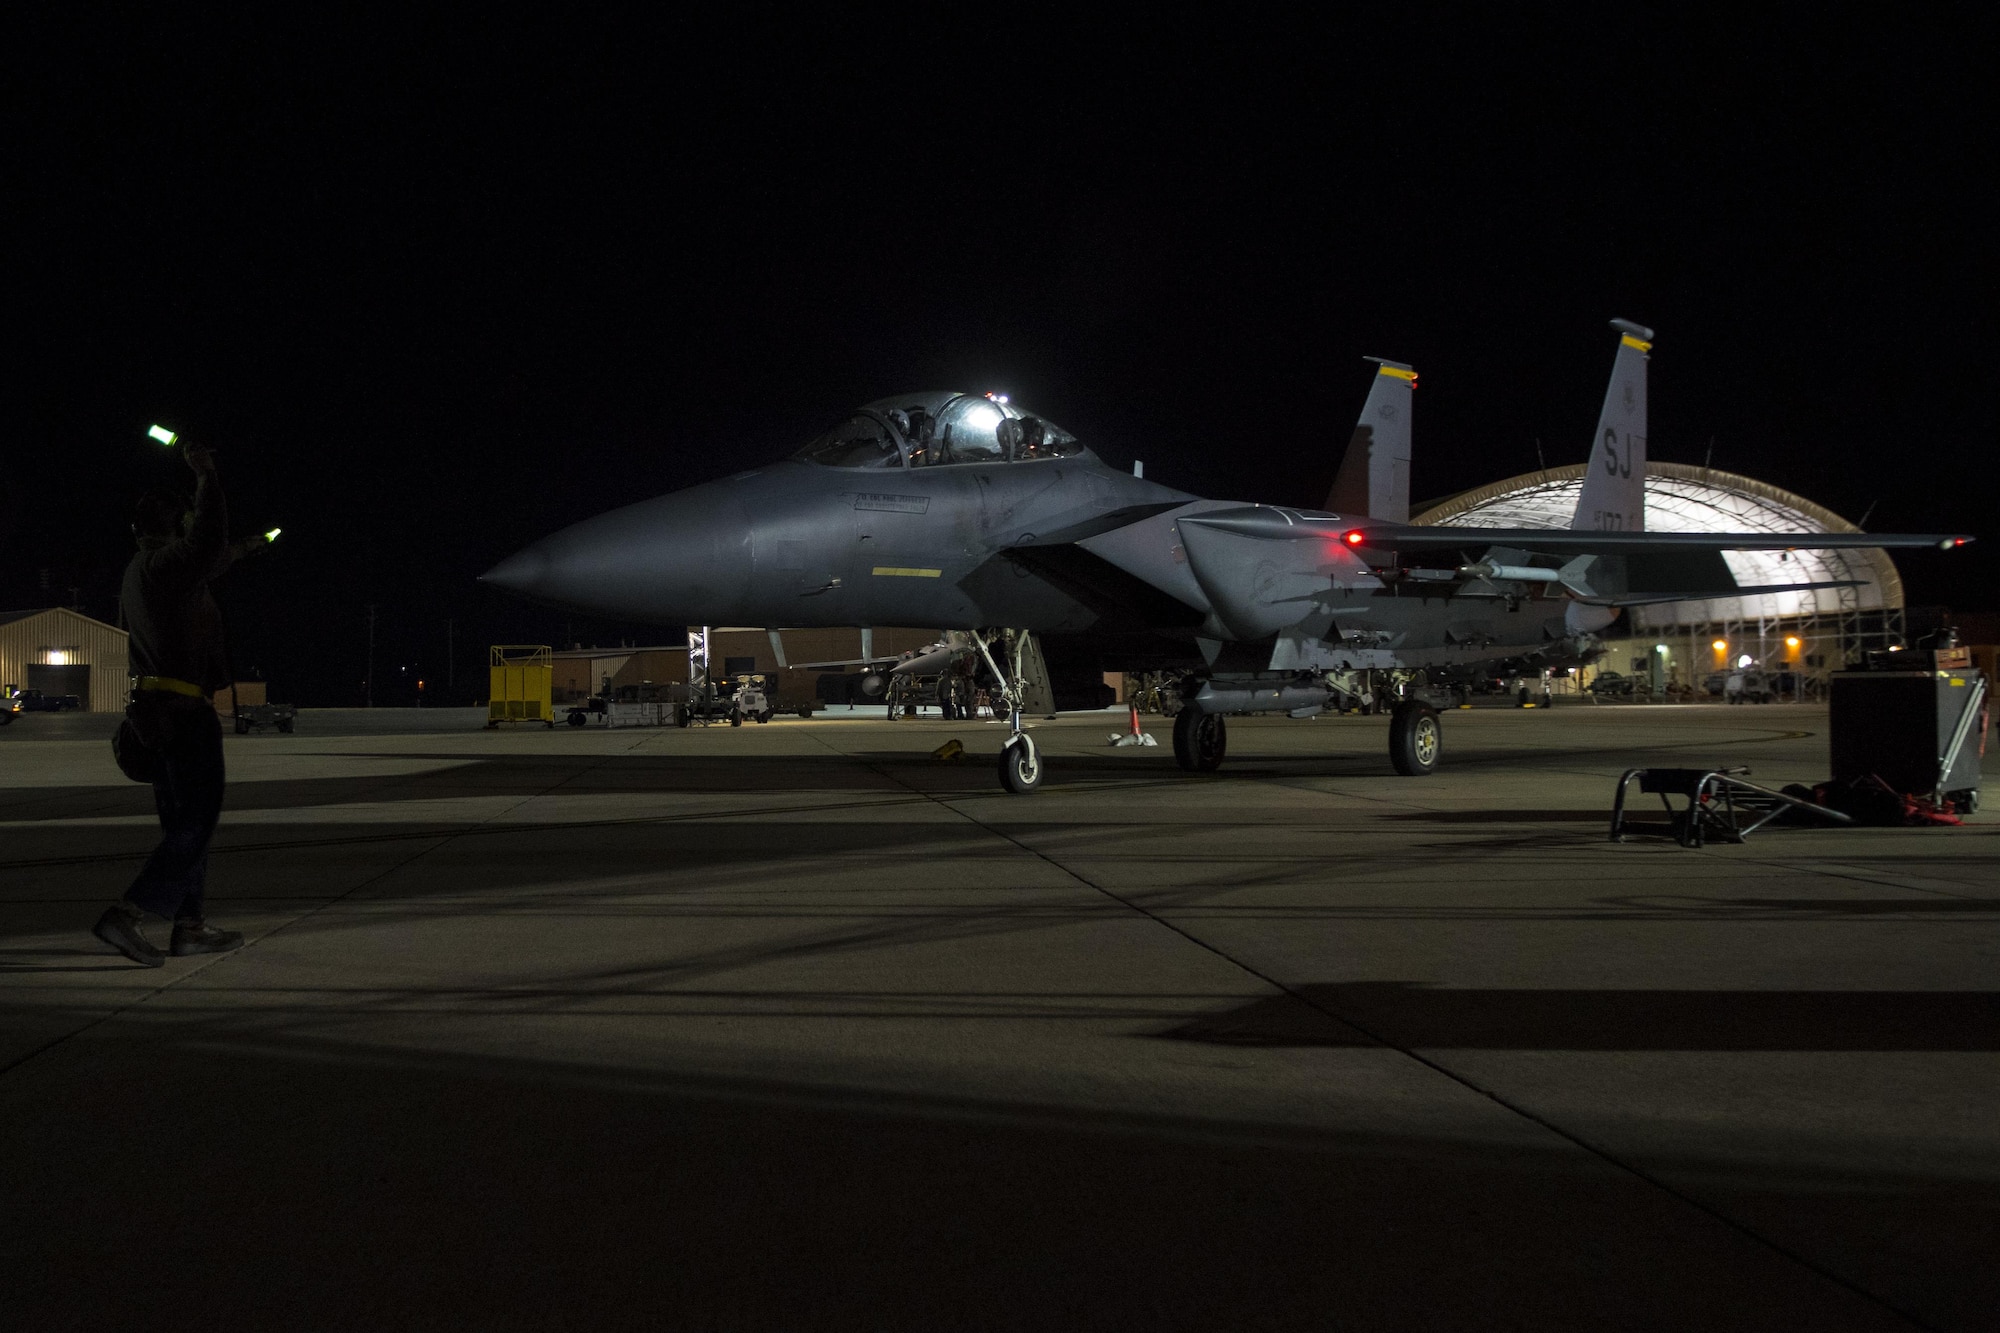 Senior Airman Joshua Sprinkle, 4th Aircraft Maintenance Squadron crew chief, marshals an F-15E Strike Eagle assigned to the 336th Fighter Squadron during exercise Coronet Warrior 17-01, Jan. 31, 2017, at Seymour Johnson Air Force Base, North Carolina. More than 138 aircraft launched during the exercise which tested Team Seymour’s ability to successfully operate in a simulated hostile environment reflecting our current area of responsibility. (U.S. Air Force photo by Airman Shawna L. Keyes)